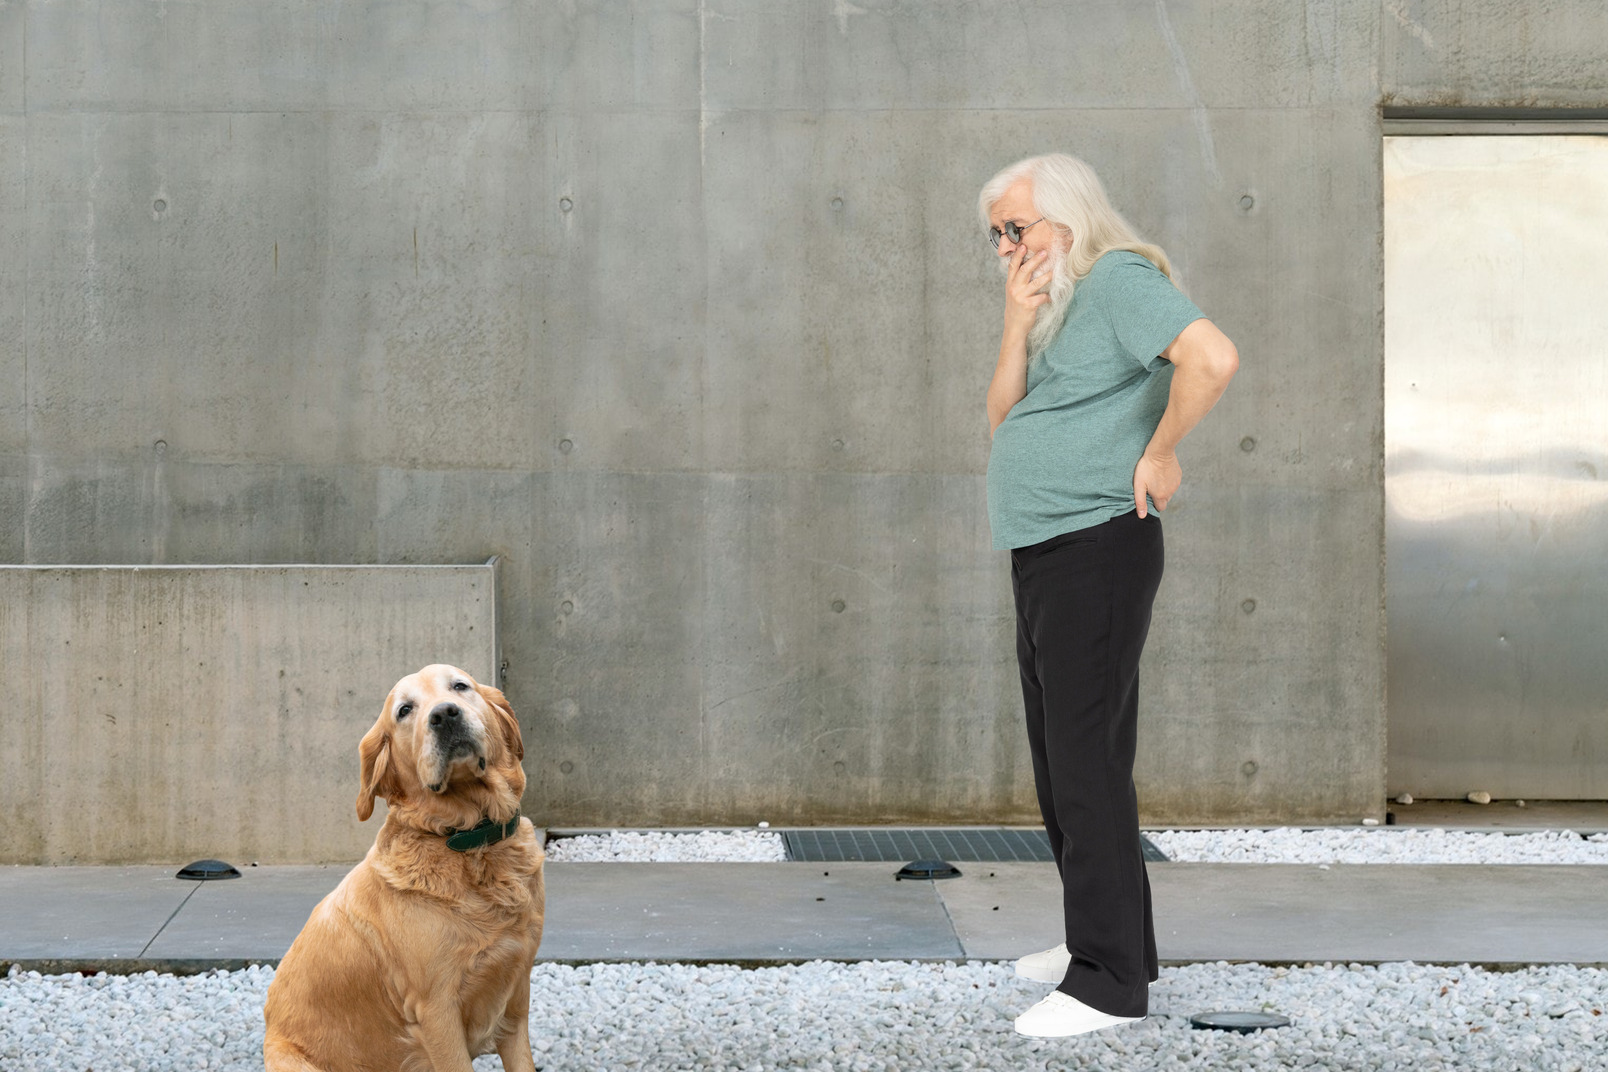 An elderly man with his dog